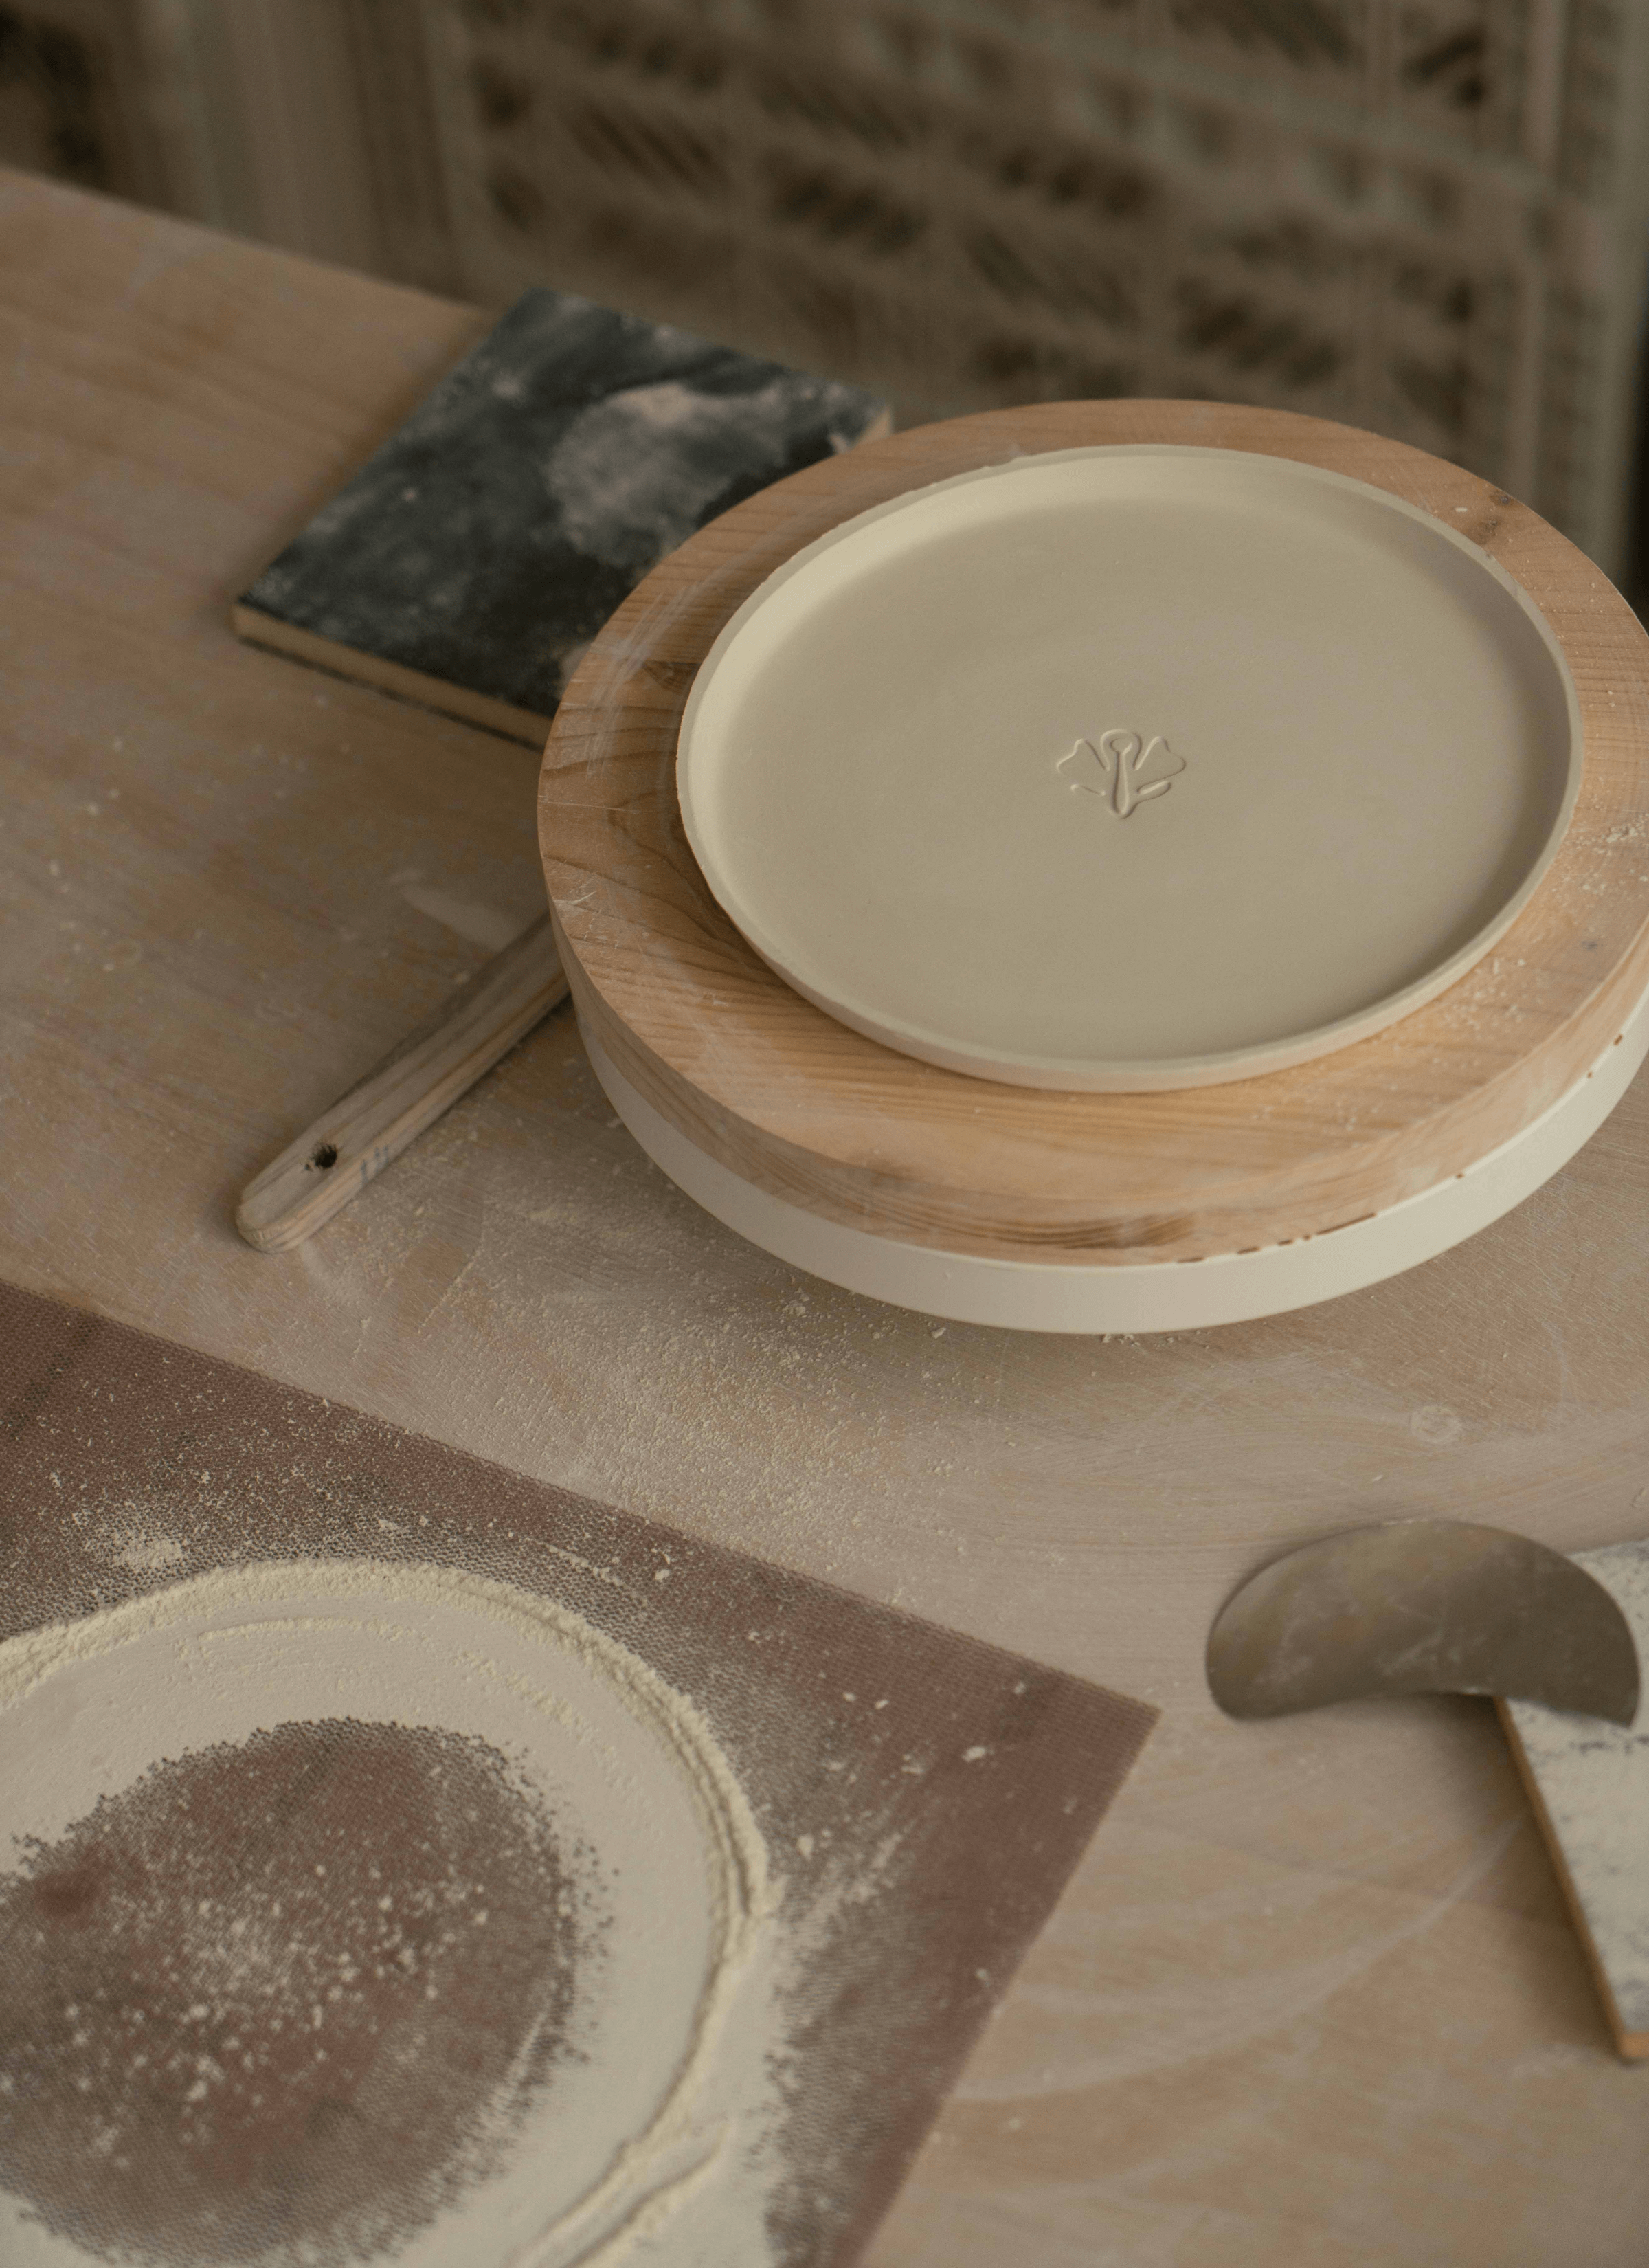 A table with a sand paper covered with the ceramic powder rubbed from ceramic projects, a saucer with Sowvital label on it and some other ceramic tools/gadgets spread out on the surface. 